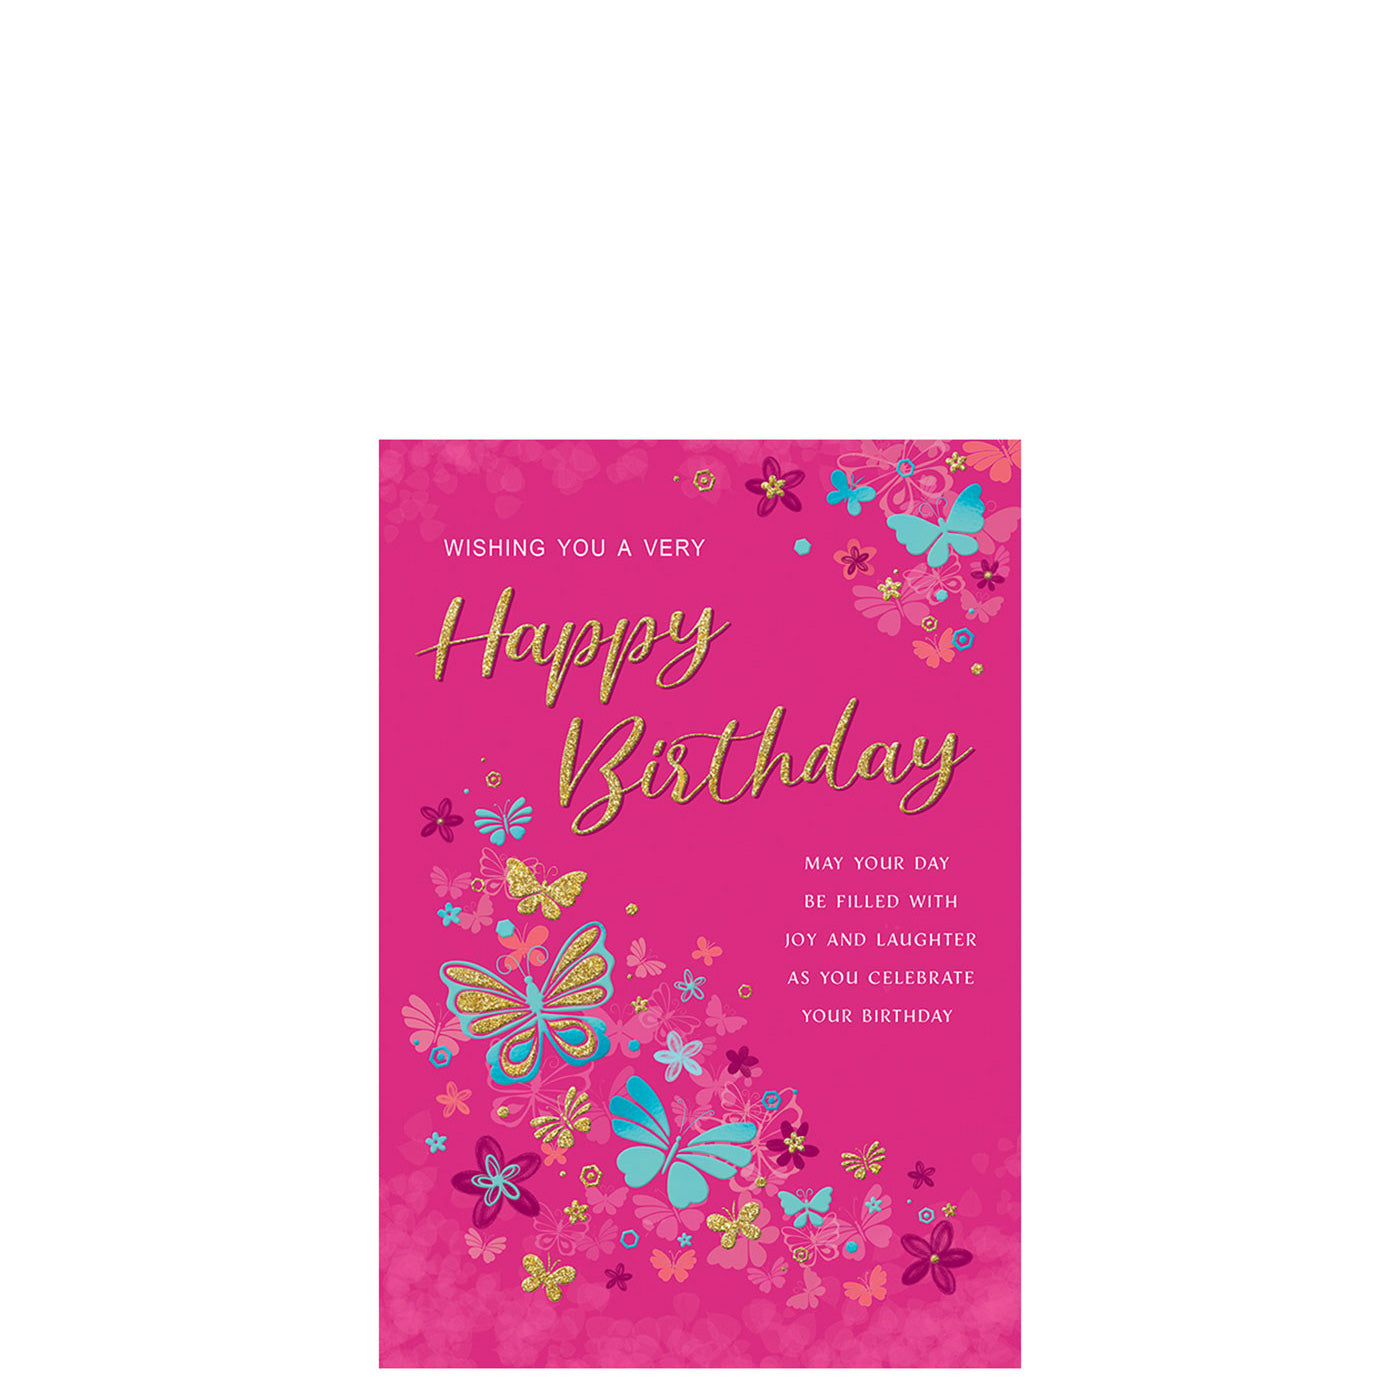 Wishing You A Happy Birthday Pink Greeting Card 9in X 6in